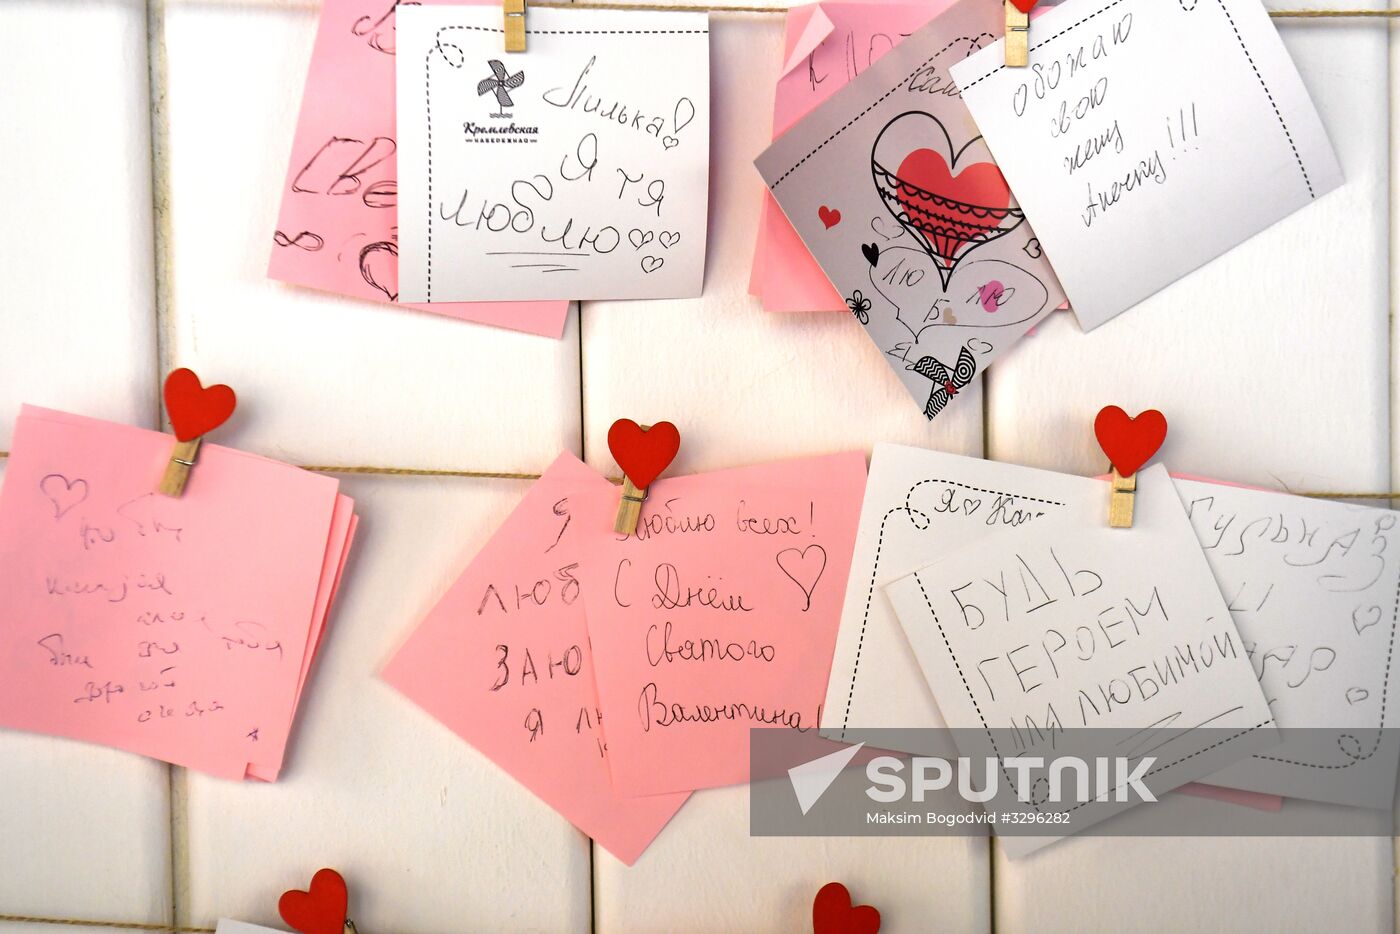 Preparations for St. Valentine Day